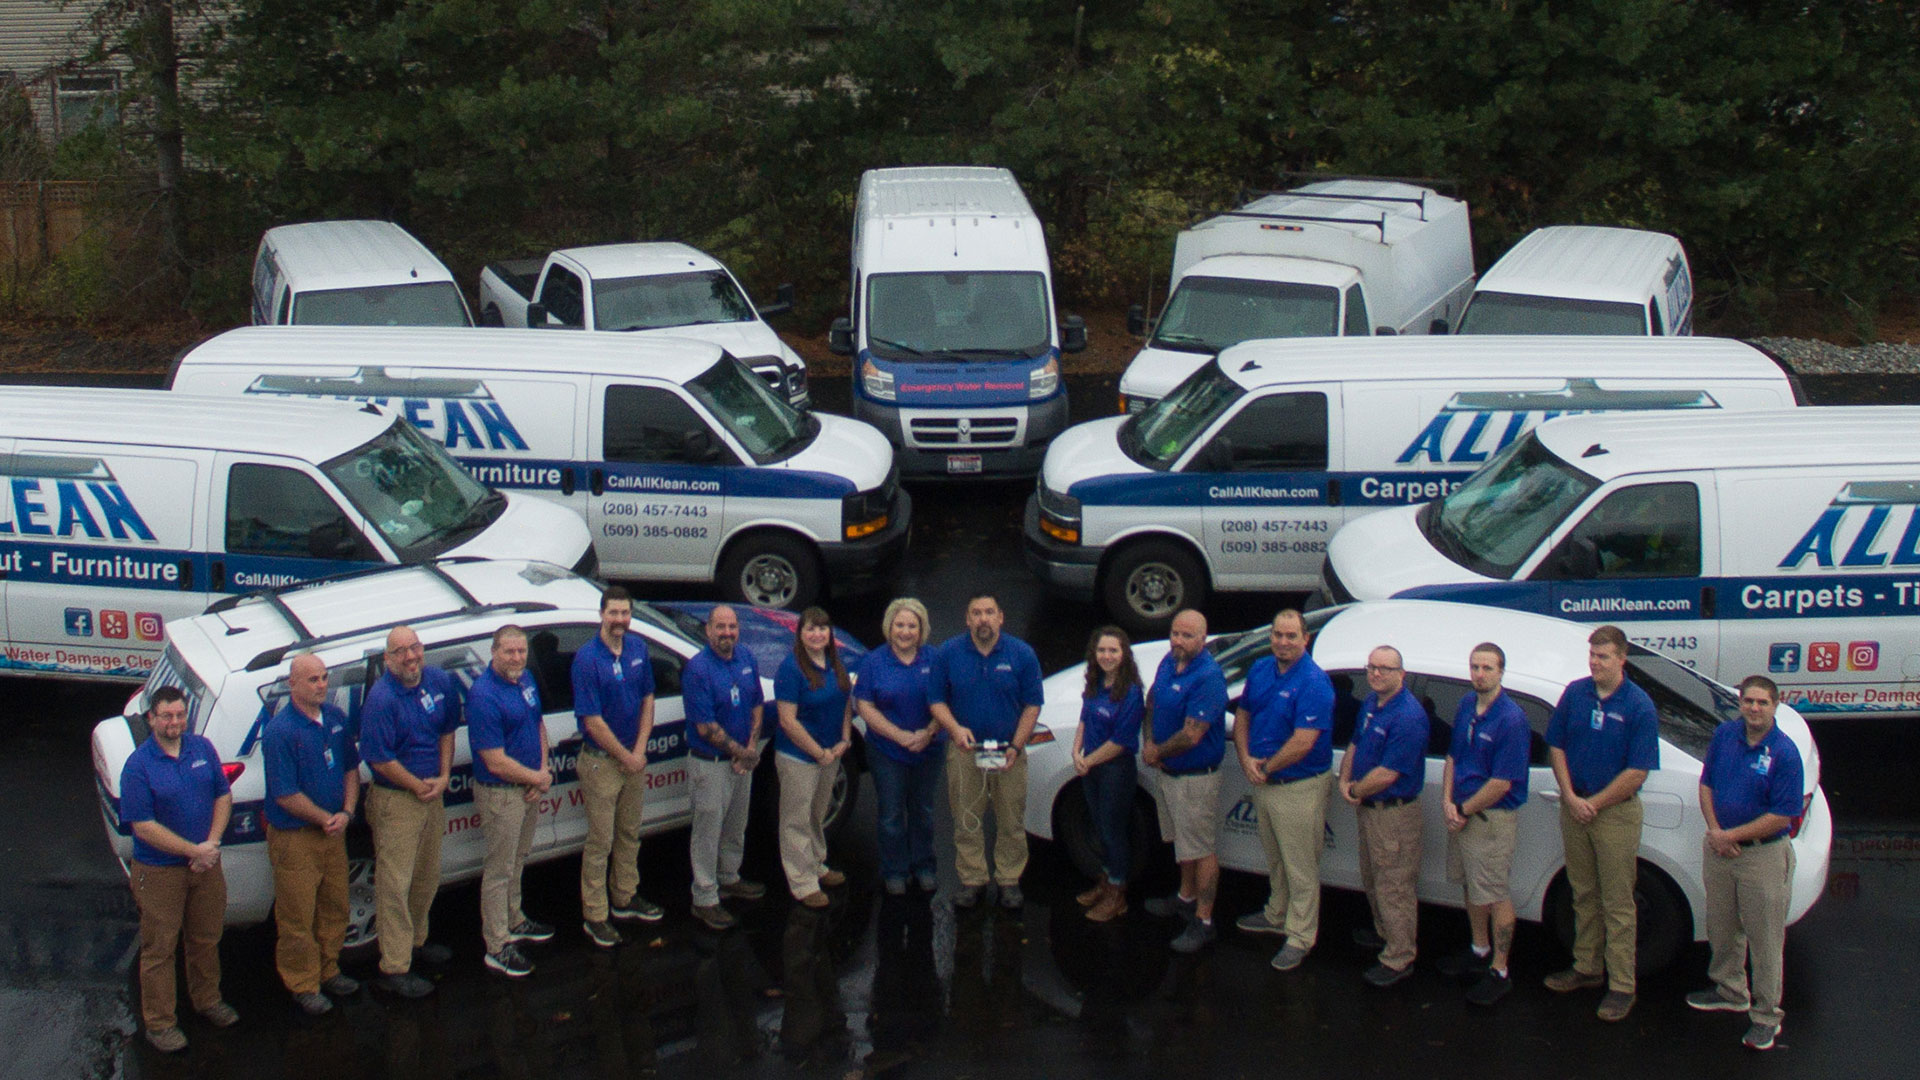 The Allklean Team - Water Damage Restoration and Carpet Cleaners